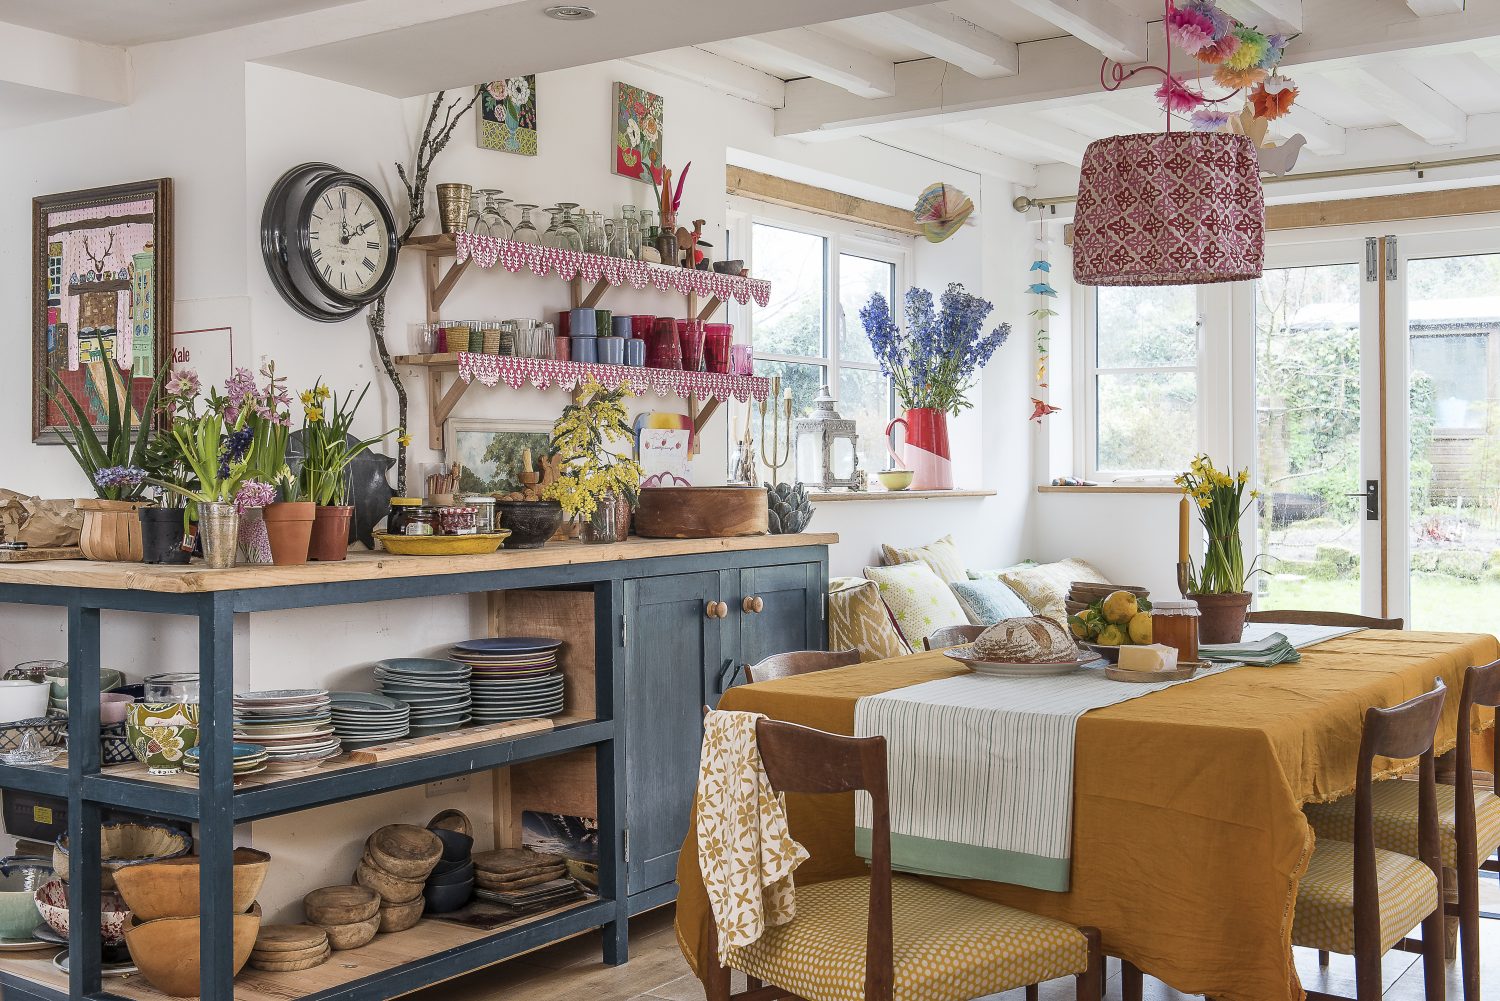 The lampshade over the kitchen table is in Molly’s design Pattee. The worktops were made from scaffolding planks